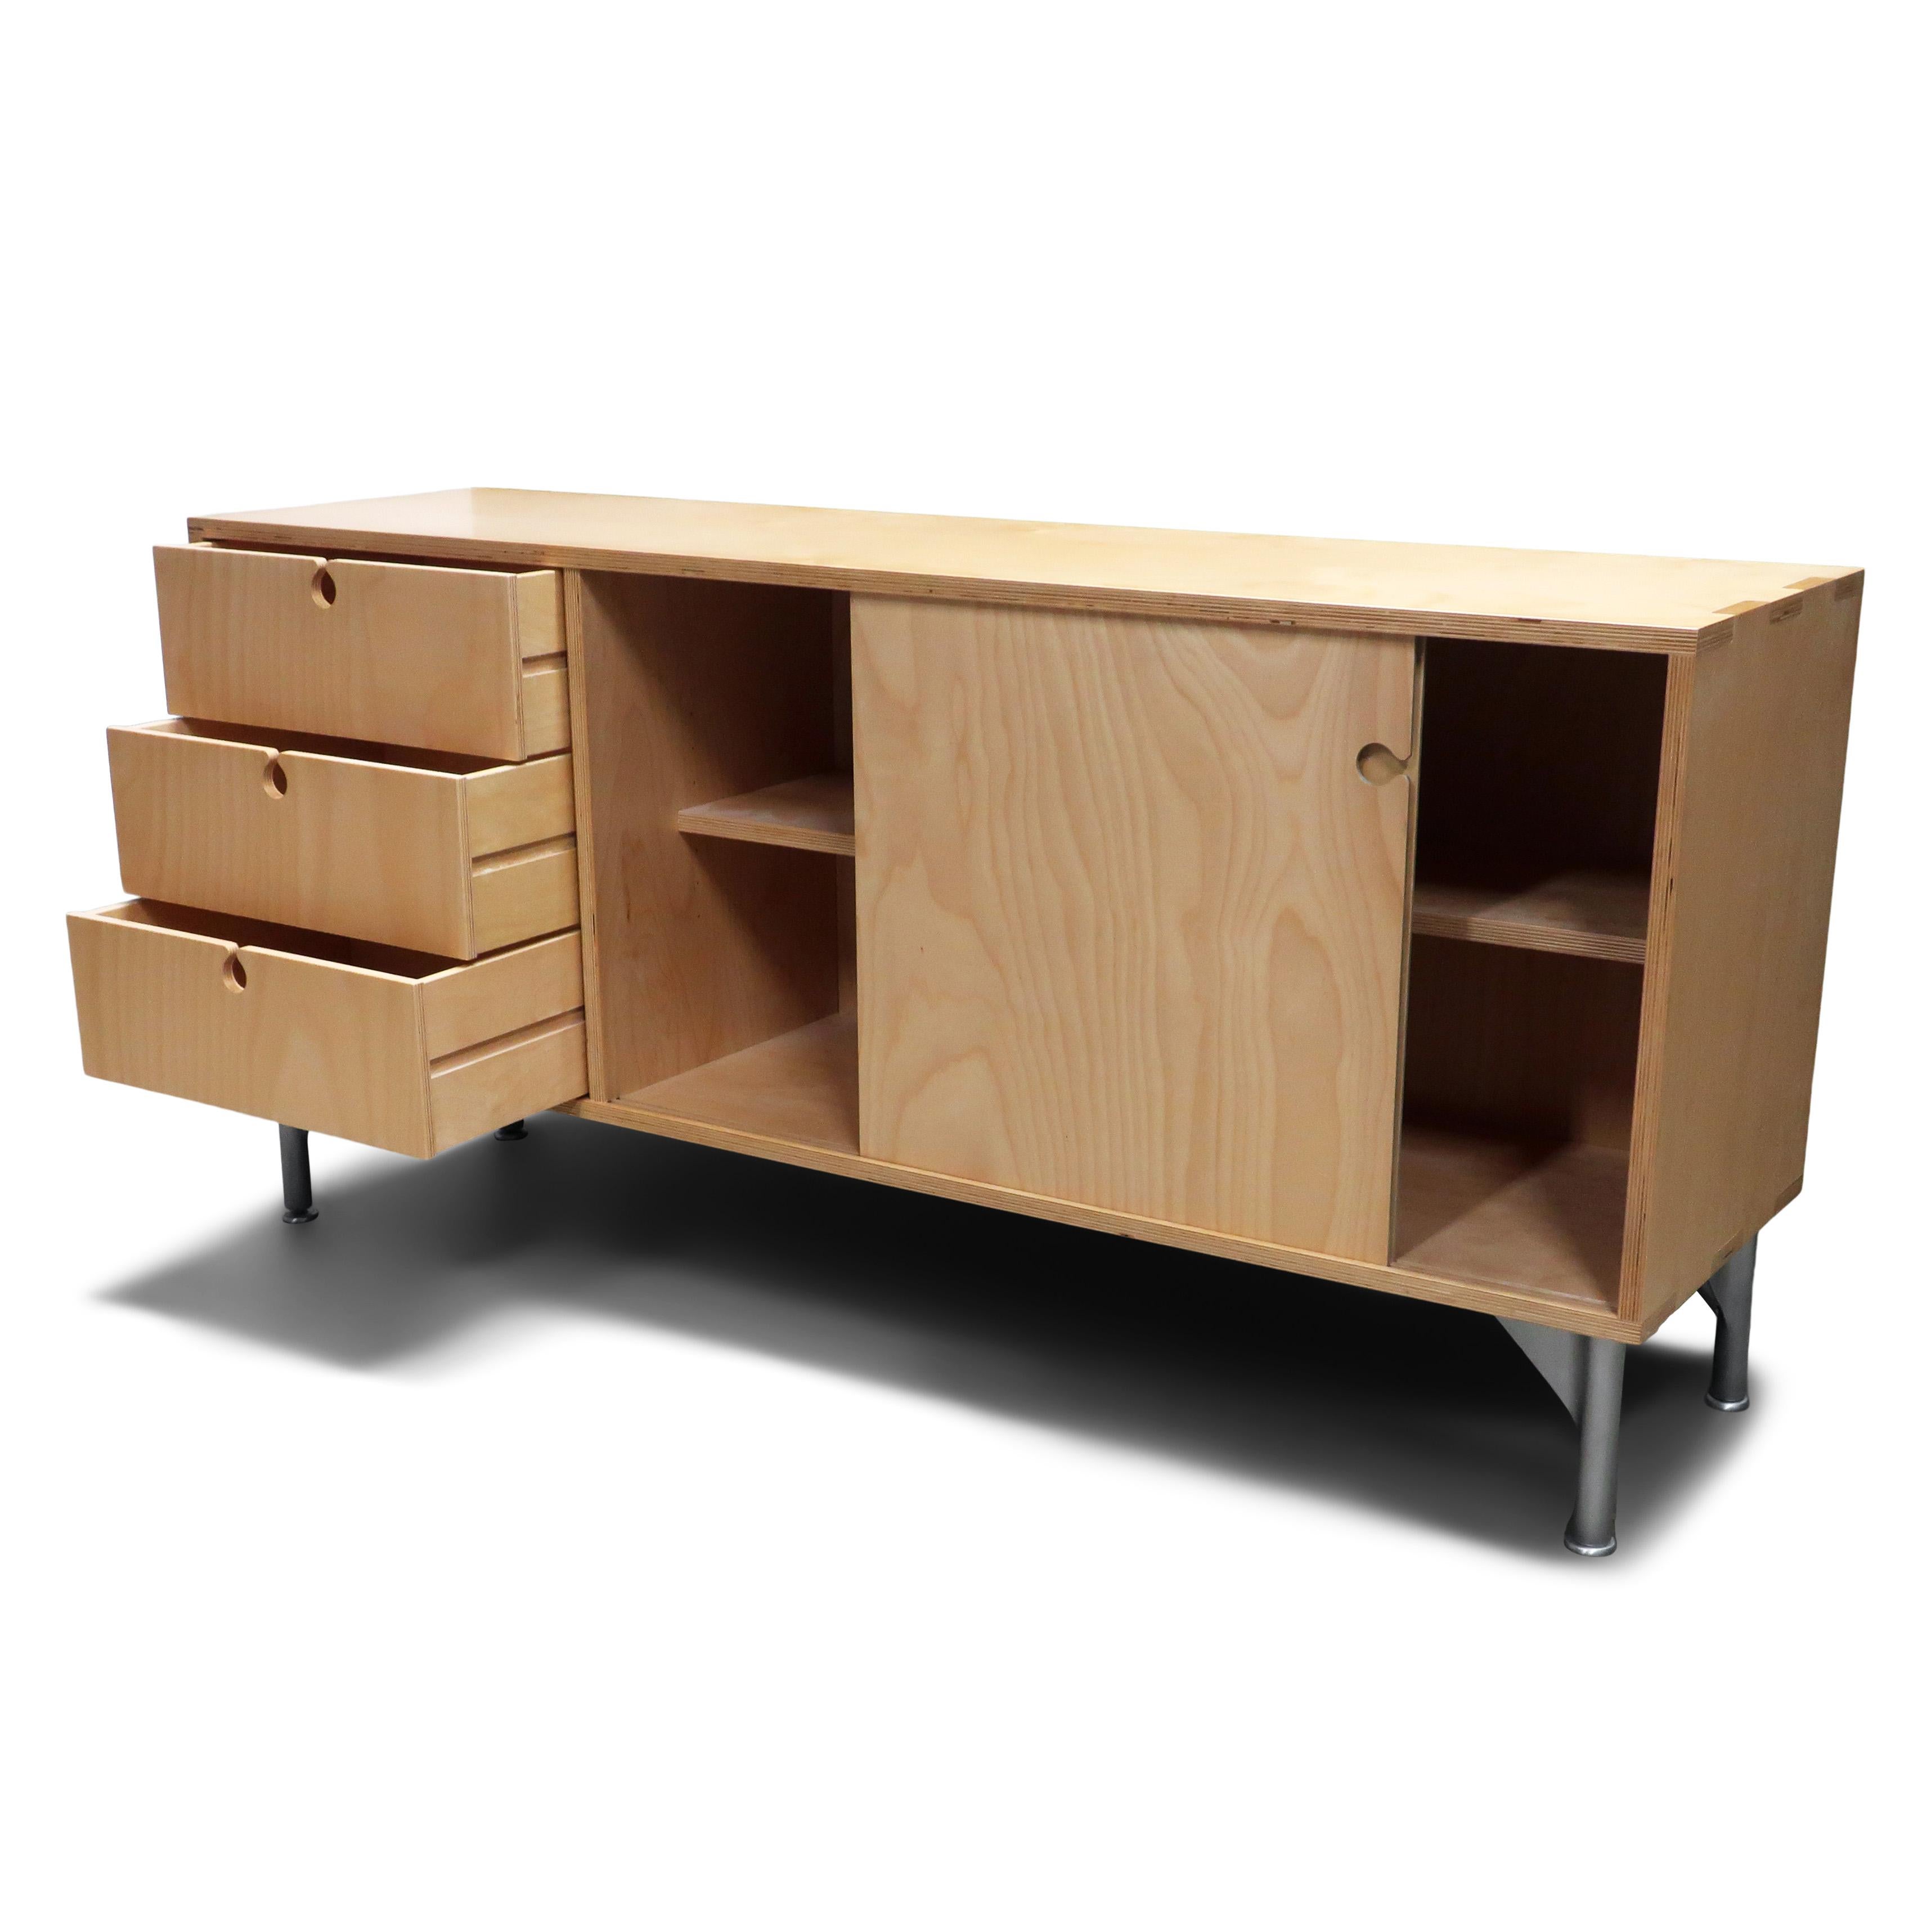 1990 Universal System Credenza and Cabinets by Jasper Morrison for Cappellini 1